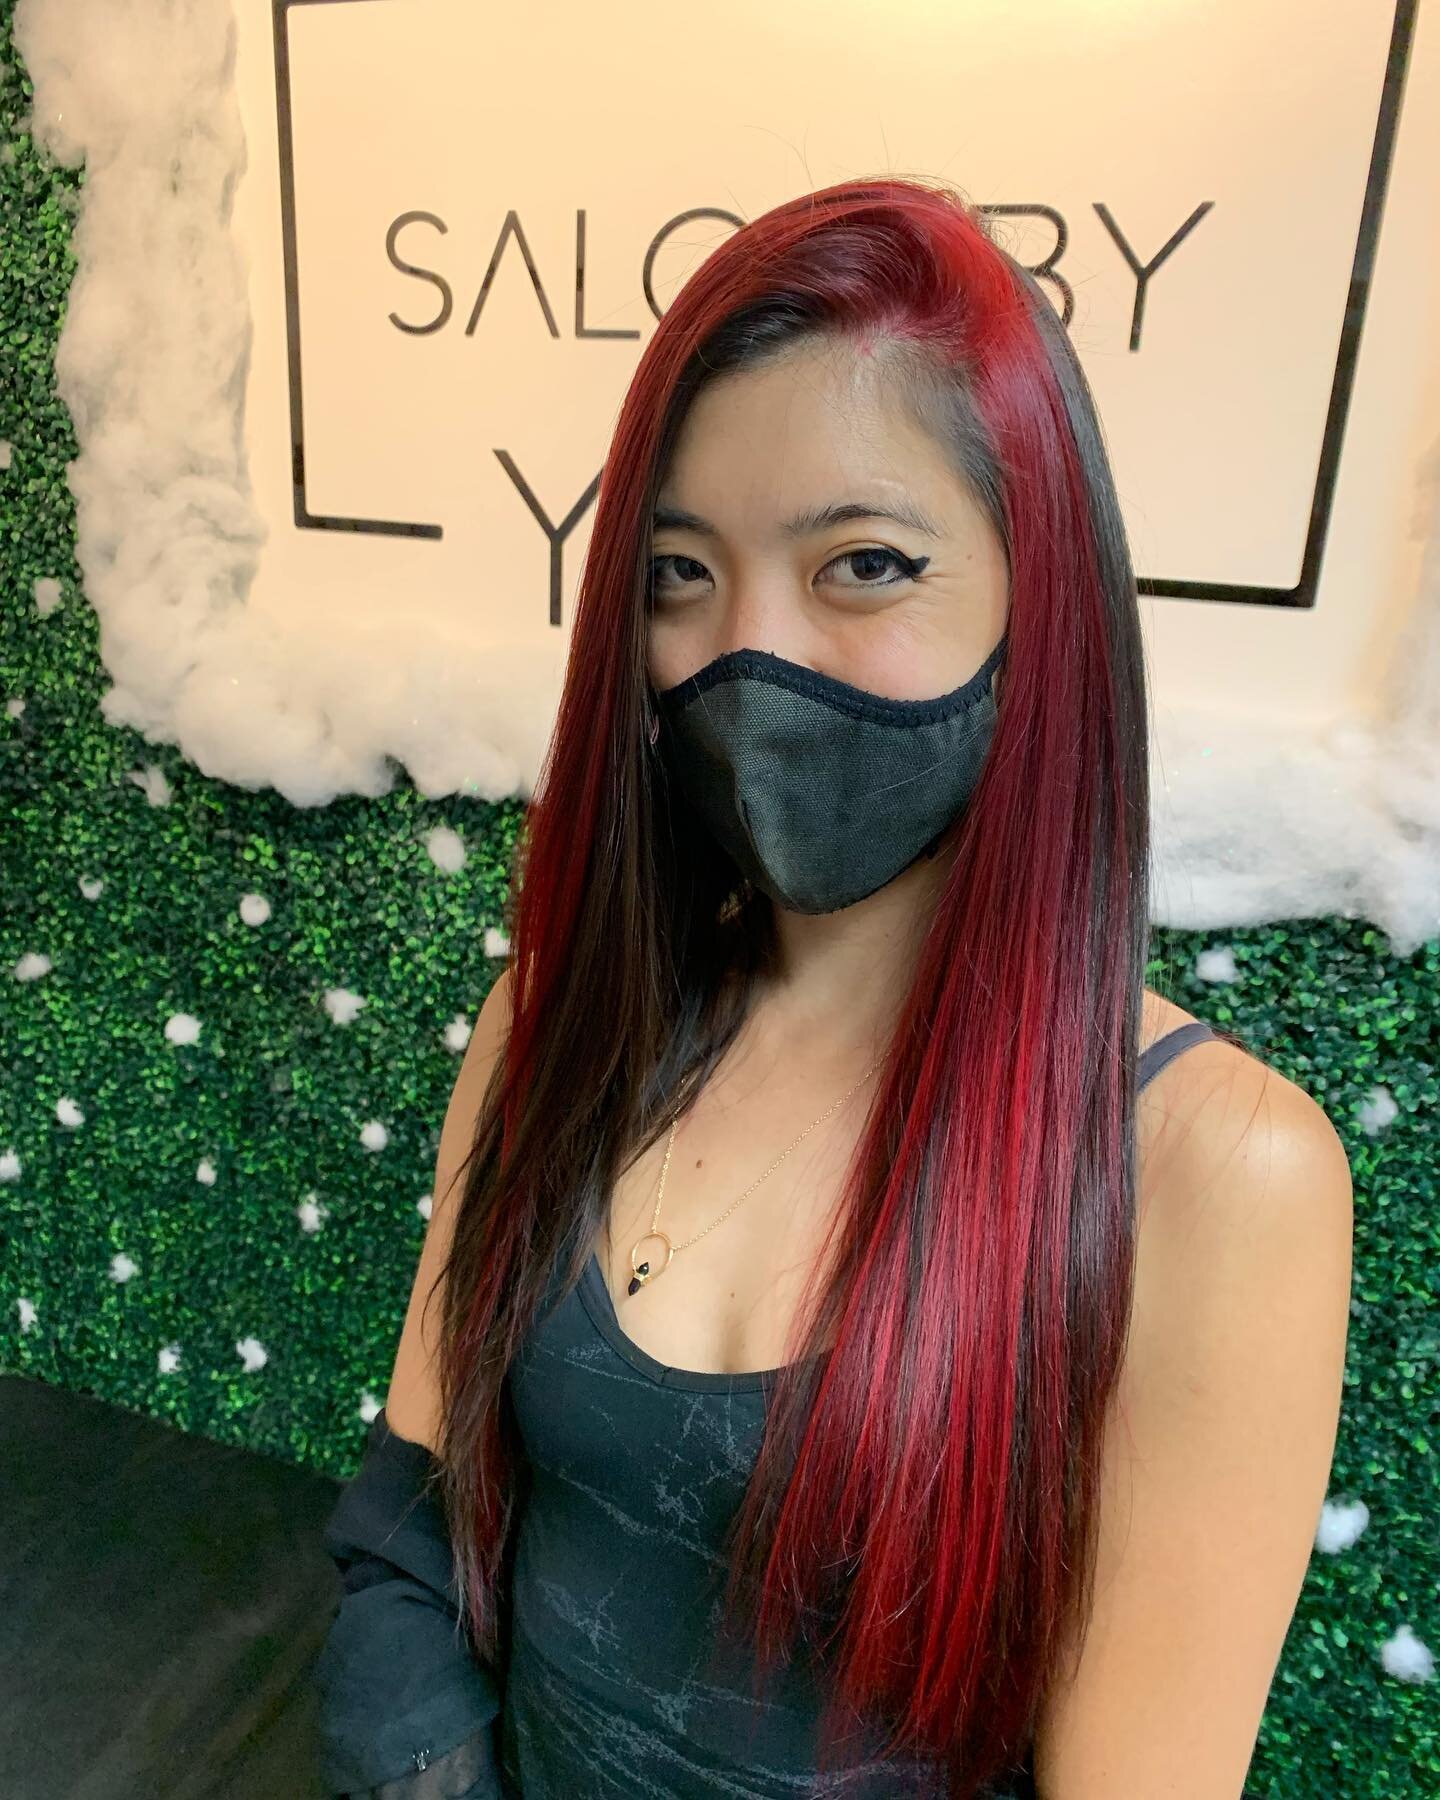 Merry Christmas everyone! 
Red peekaboo color ❤️
Hair done by @veeyourself_beauty 

#salonbyyoo #onlyou

For customer satisfaction, a 1:1 consultation will be performed before any service.

For appointment/consultation
DM / call at 8089551600
Email i